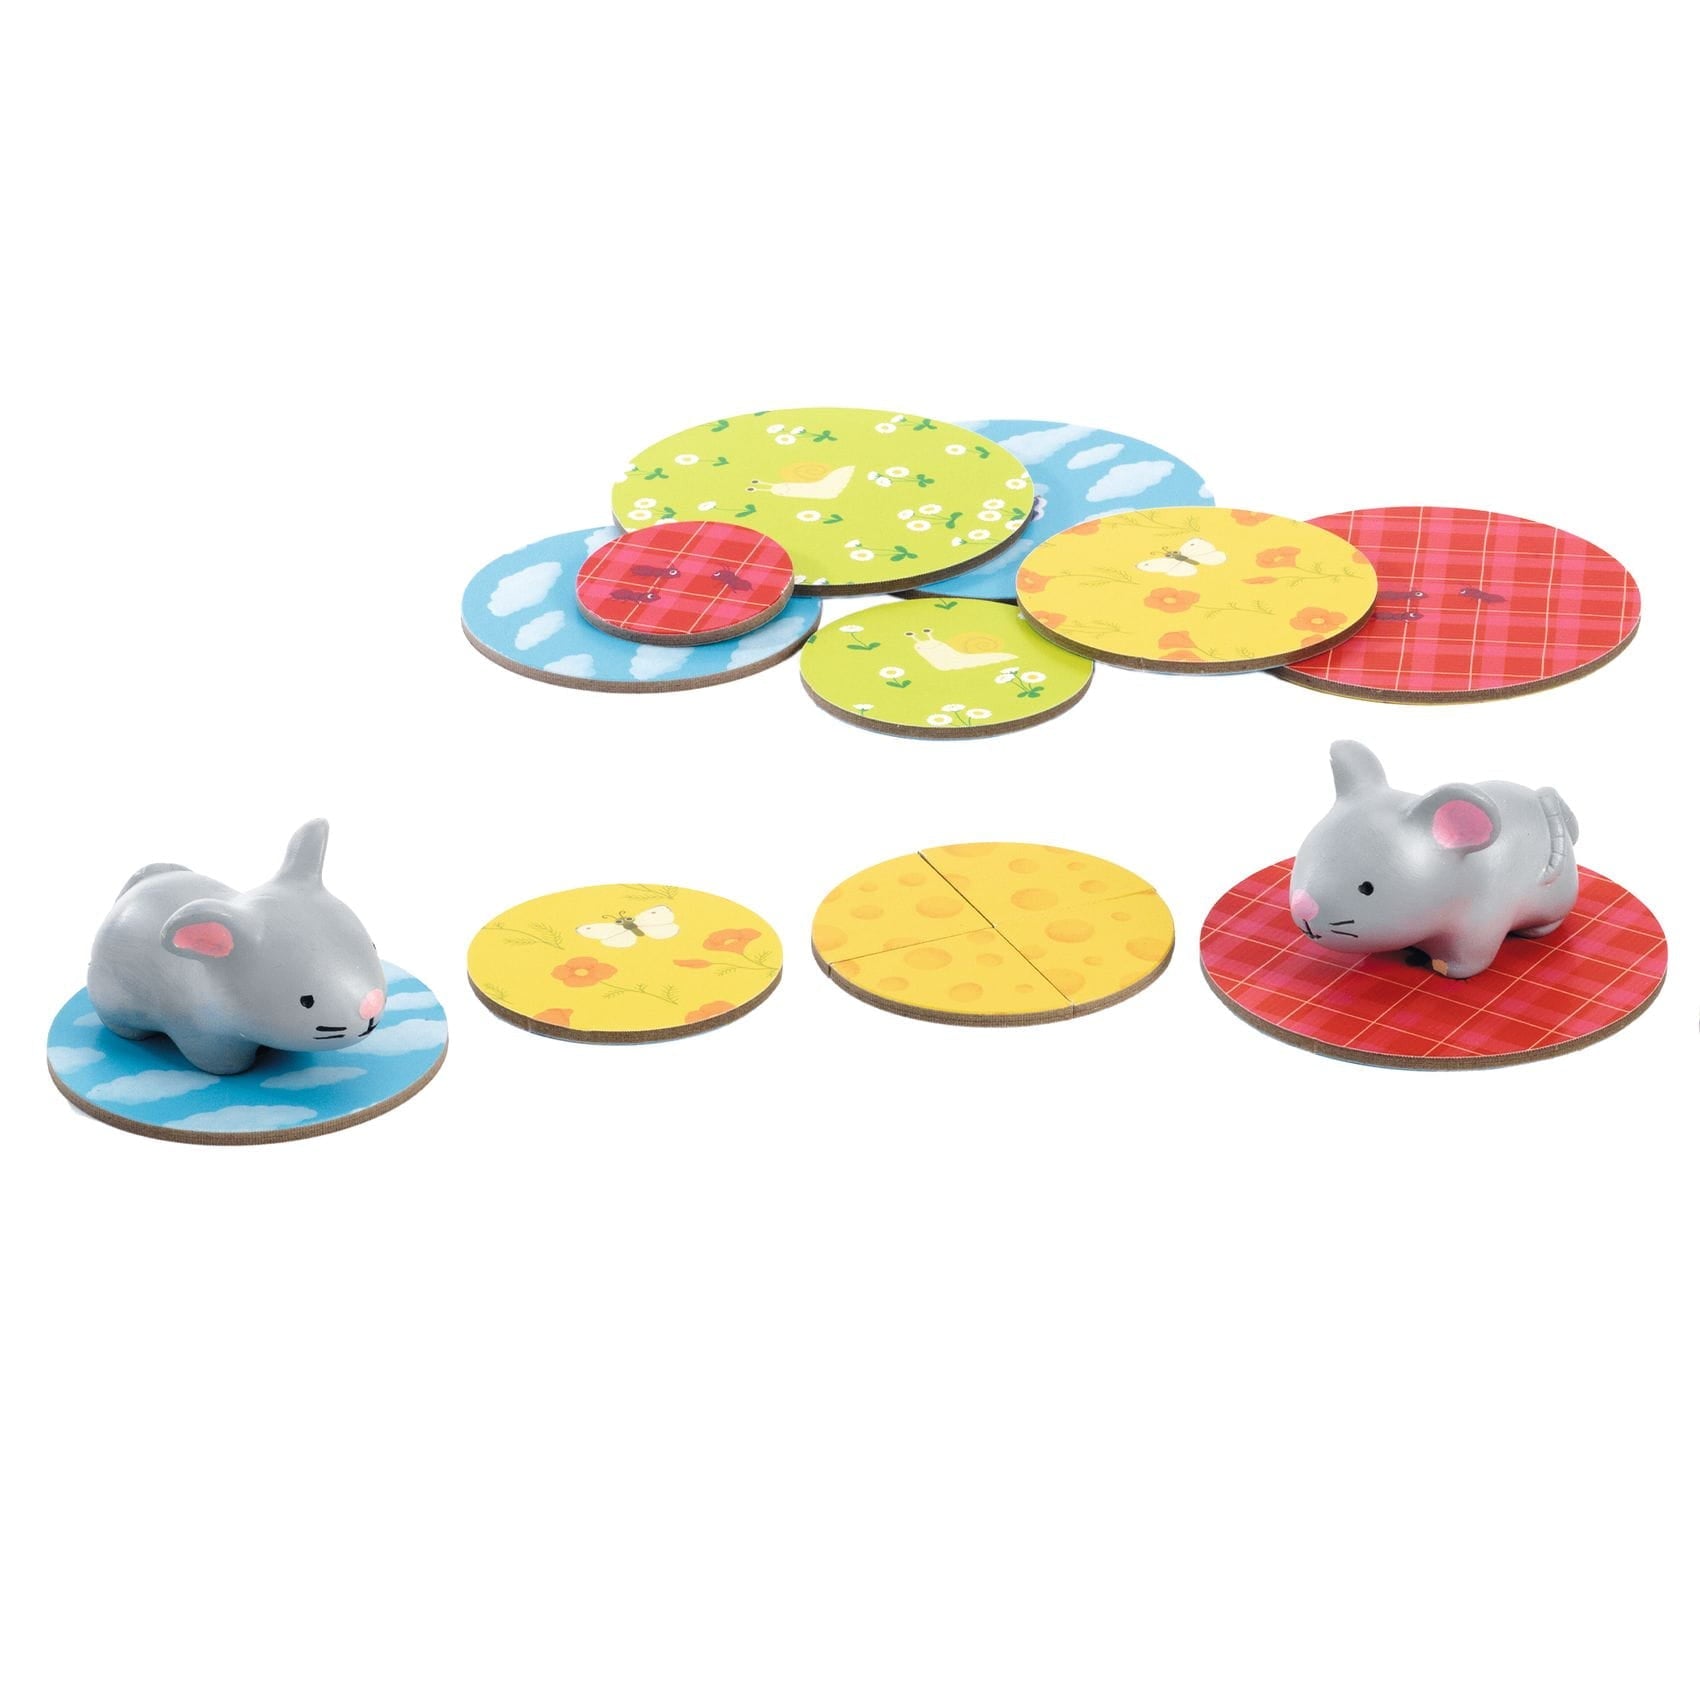 Djeco: Little Lucky mouse and cheese board game